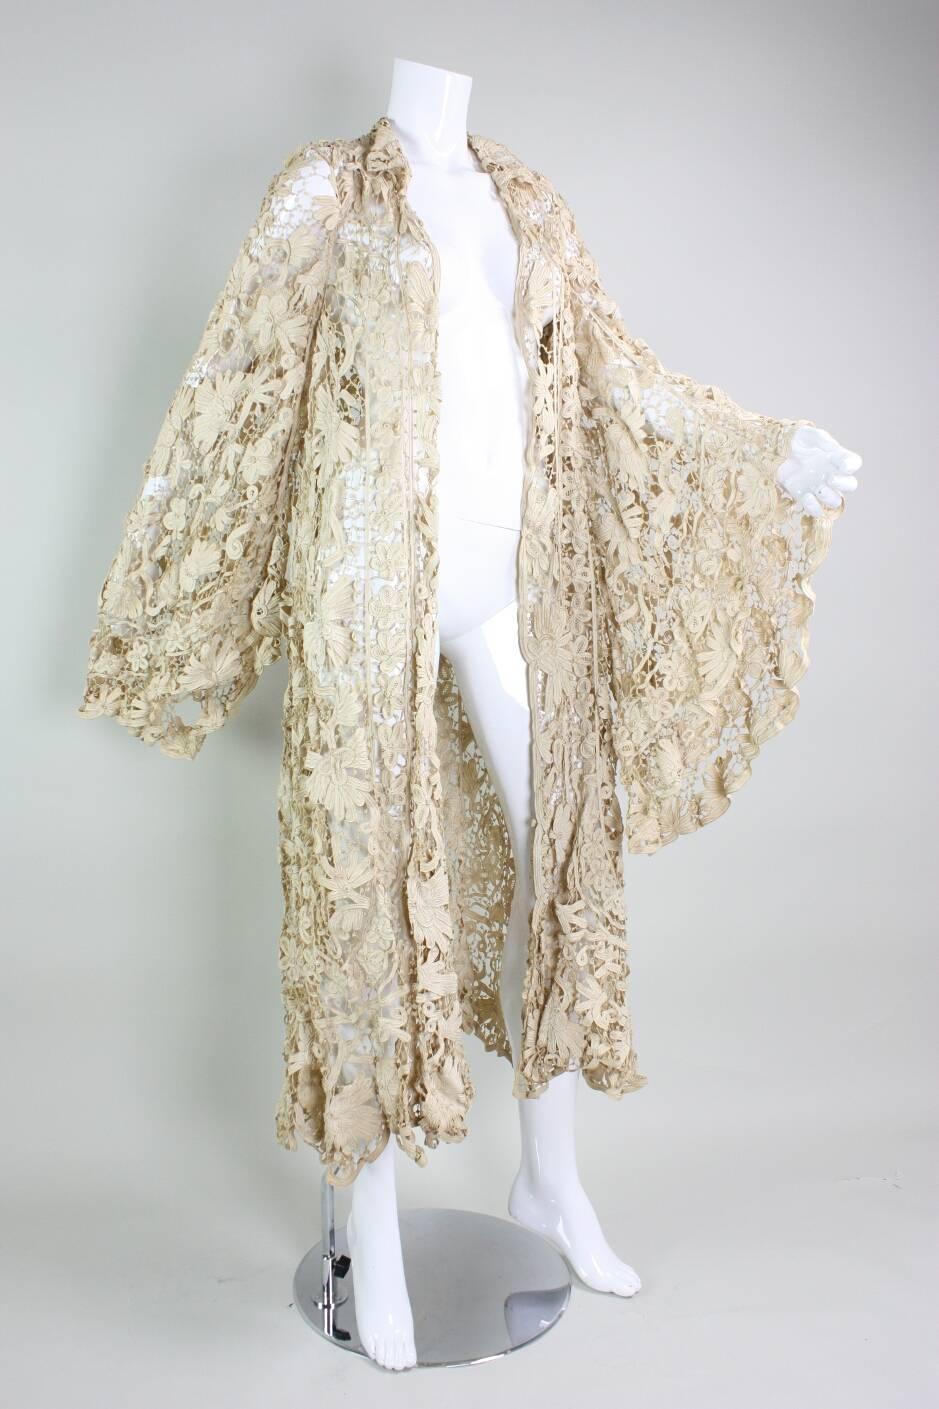 Antique coat dates to the Edwardian era and is made of ivory tape lace that is sewn in a scrolling floral pattern.  Unusual wide bell sleeves make this coat an extremely rare piece.  Turn down collar.  No closures.  Unlined.

Condition: Very good,